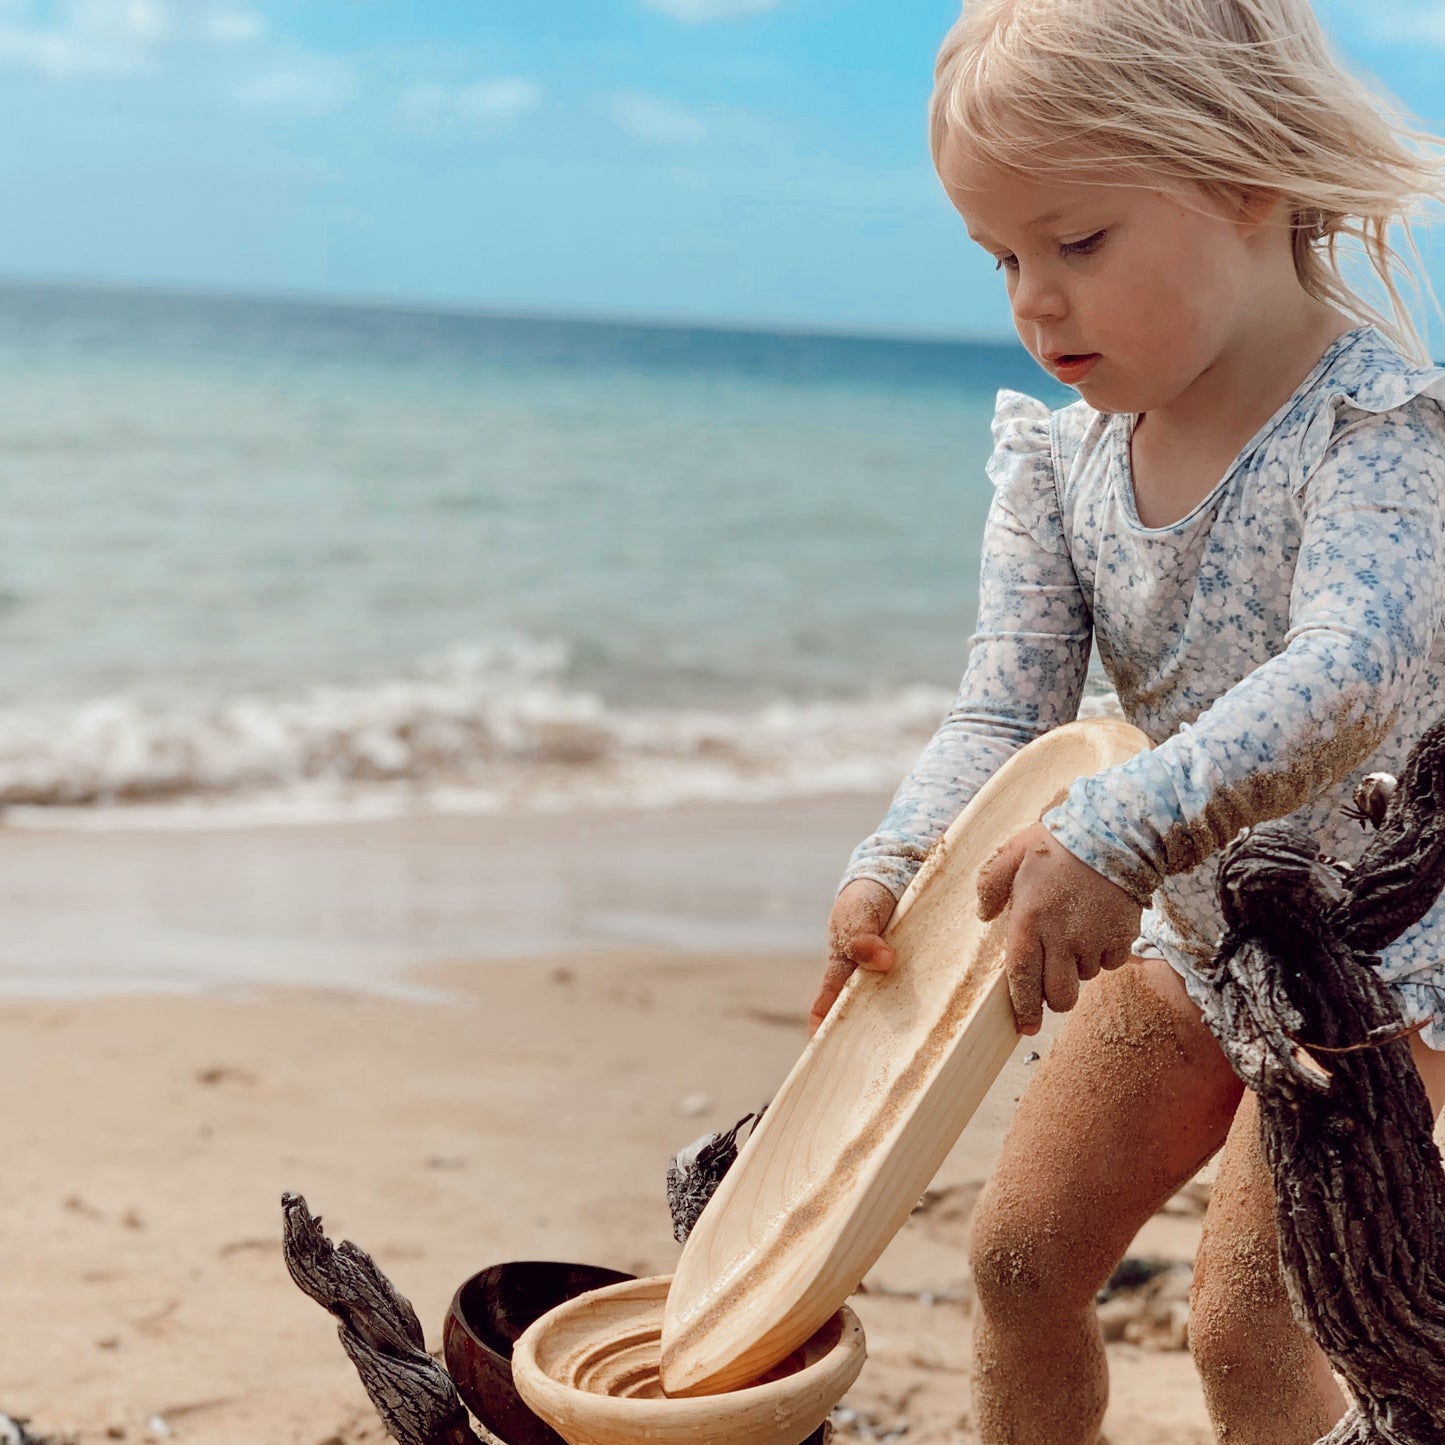 Explore Nook Wooden Toy Boat Canoe - Little Reef and Friends